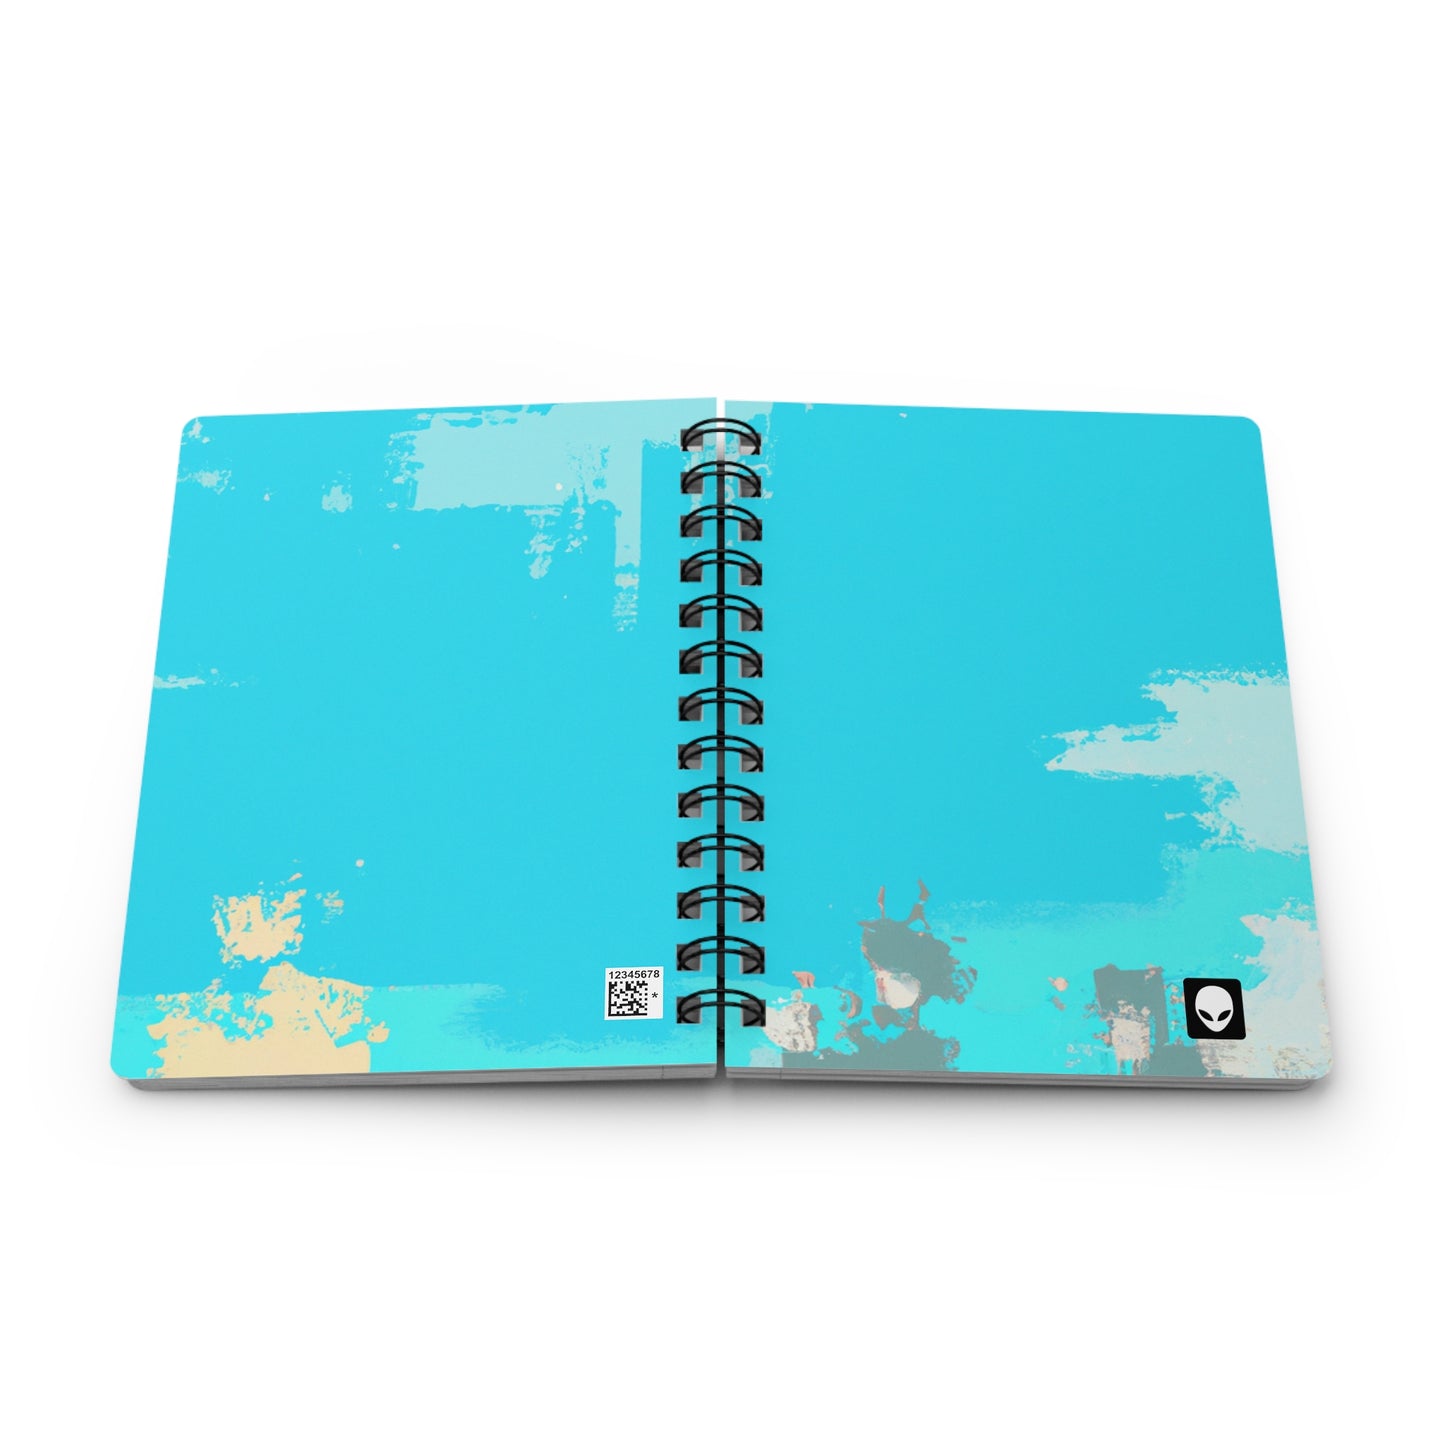 "A Breezy Skyscape: A Combination of Tradition and Modernity" - The Alien Spiral Bound Journal